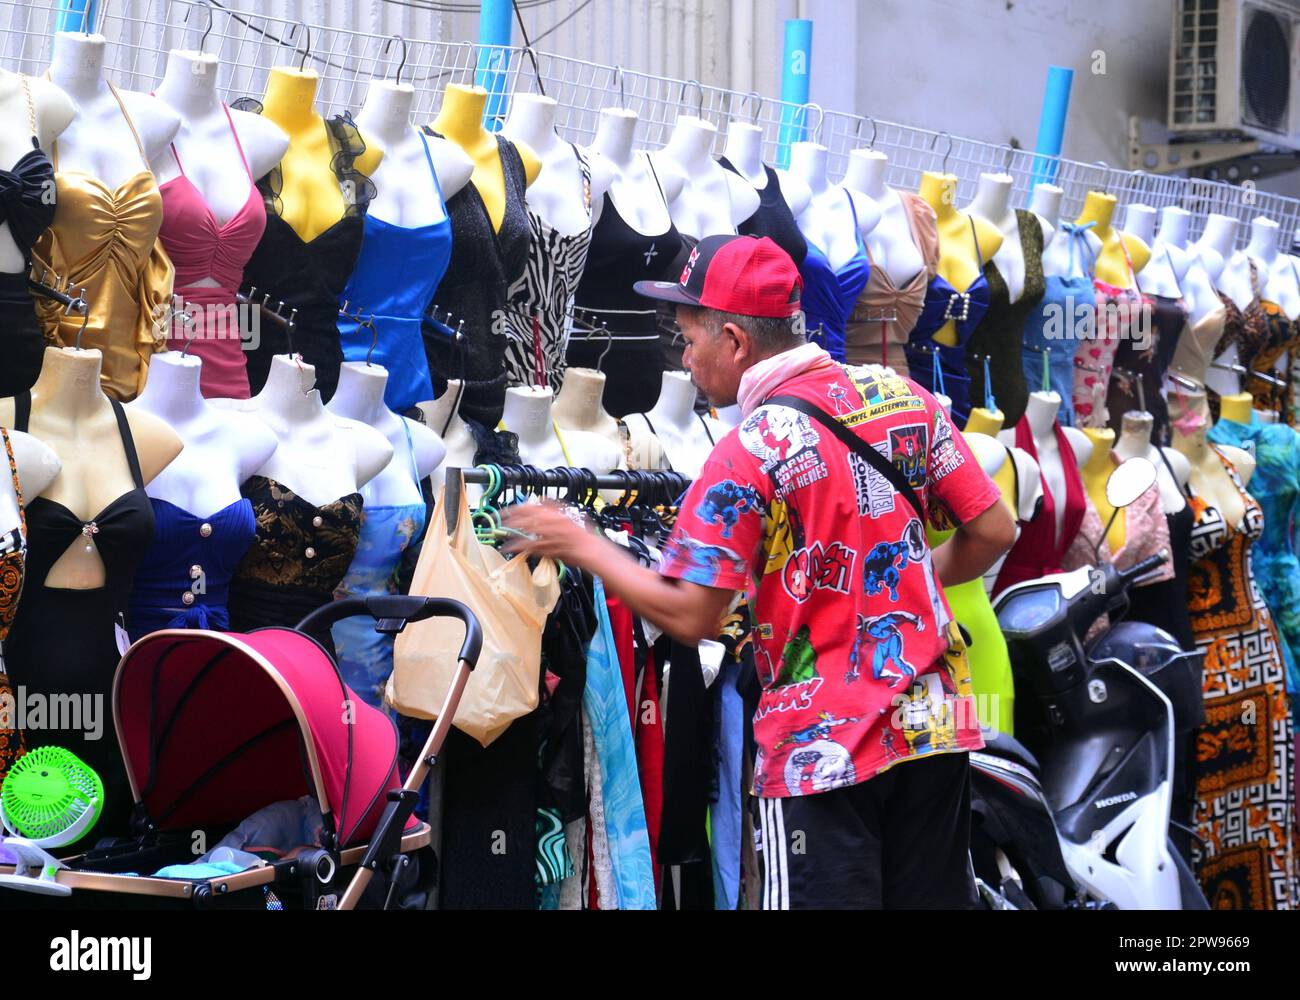 Working people, Bangkok, Thailand, Asia. A man prepares the display on a pavement clothes stall in Silom District. Baby in pram at bottom left: working people often take children to work when doing outside jobs in Thailand as they have no choice. A handy fence used to display the clothes. Work, worker, working, job, employment, earn money theme. Stock Photo